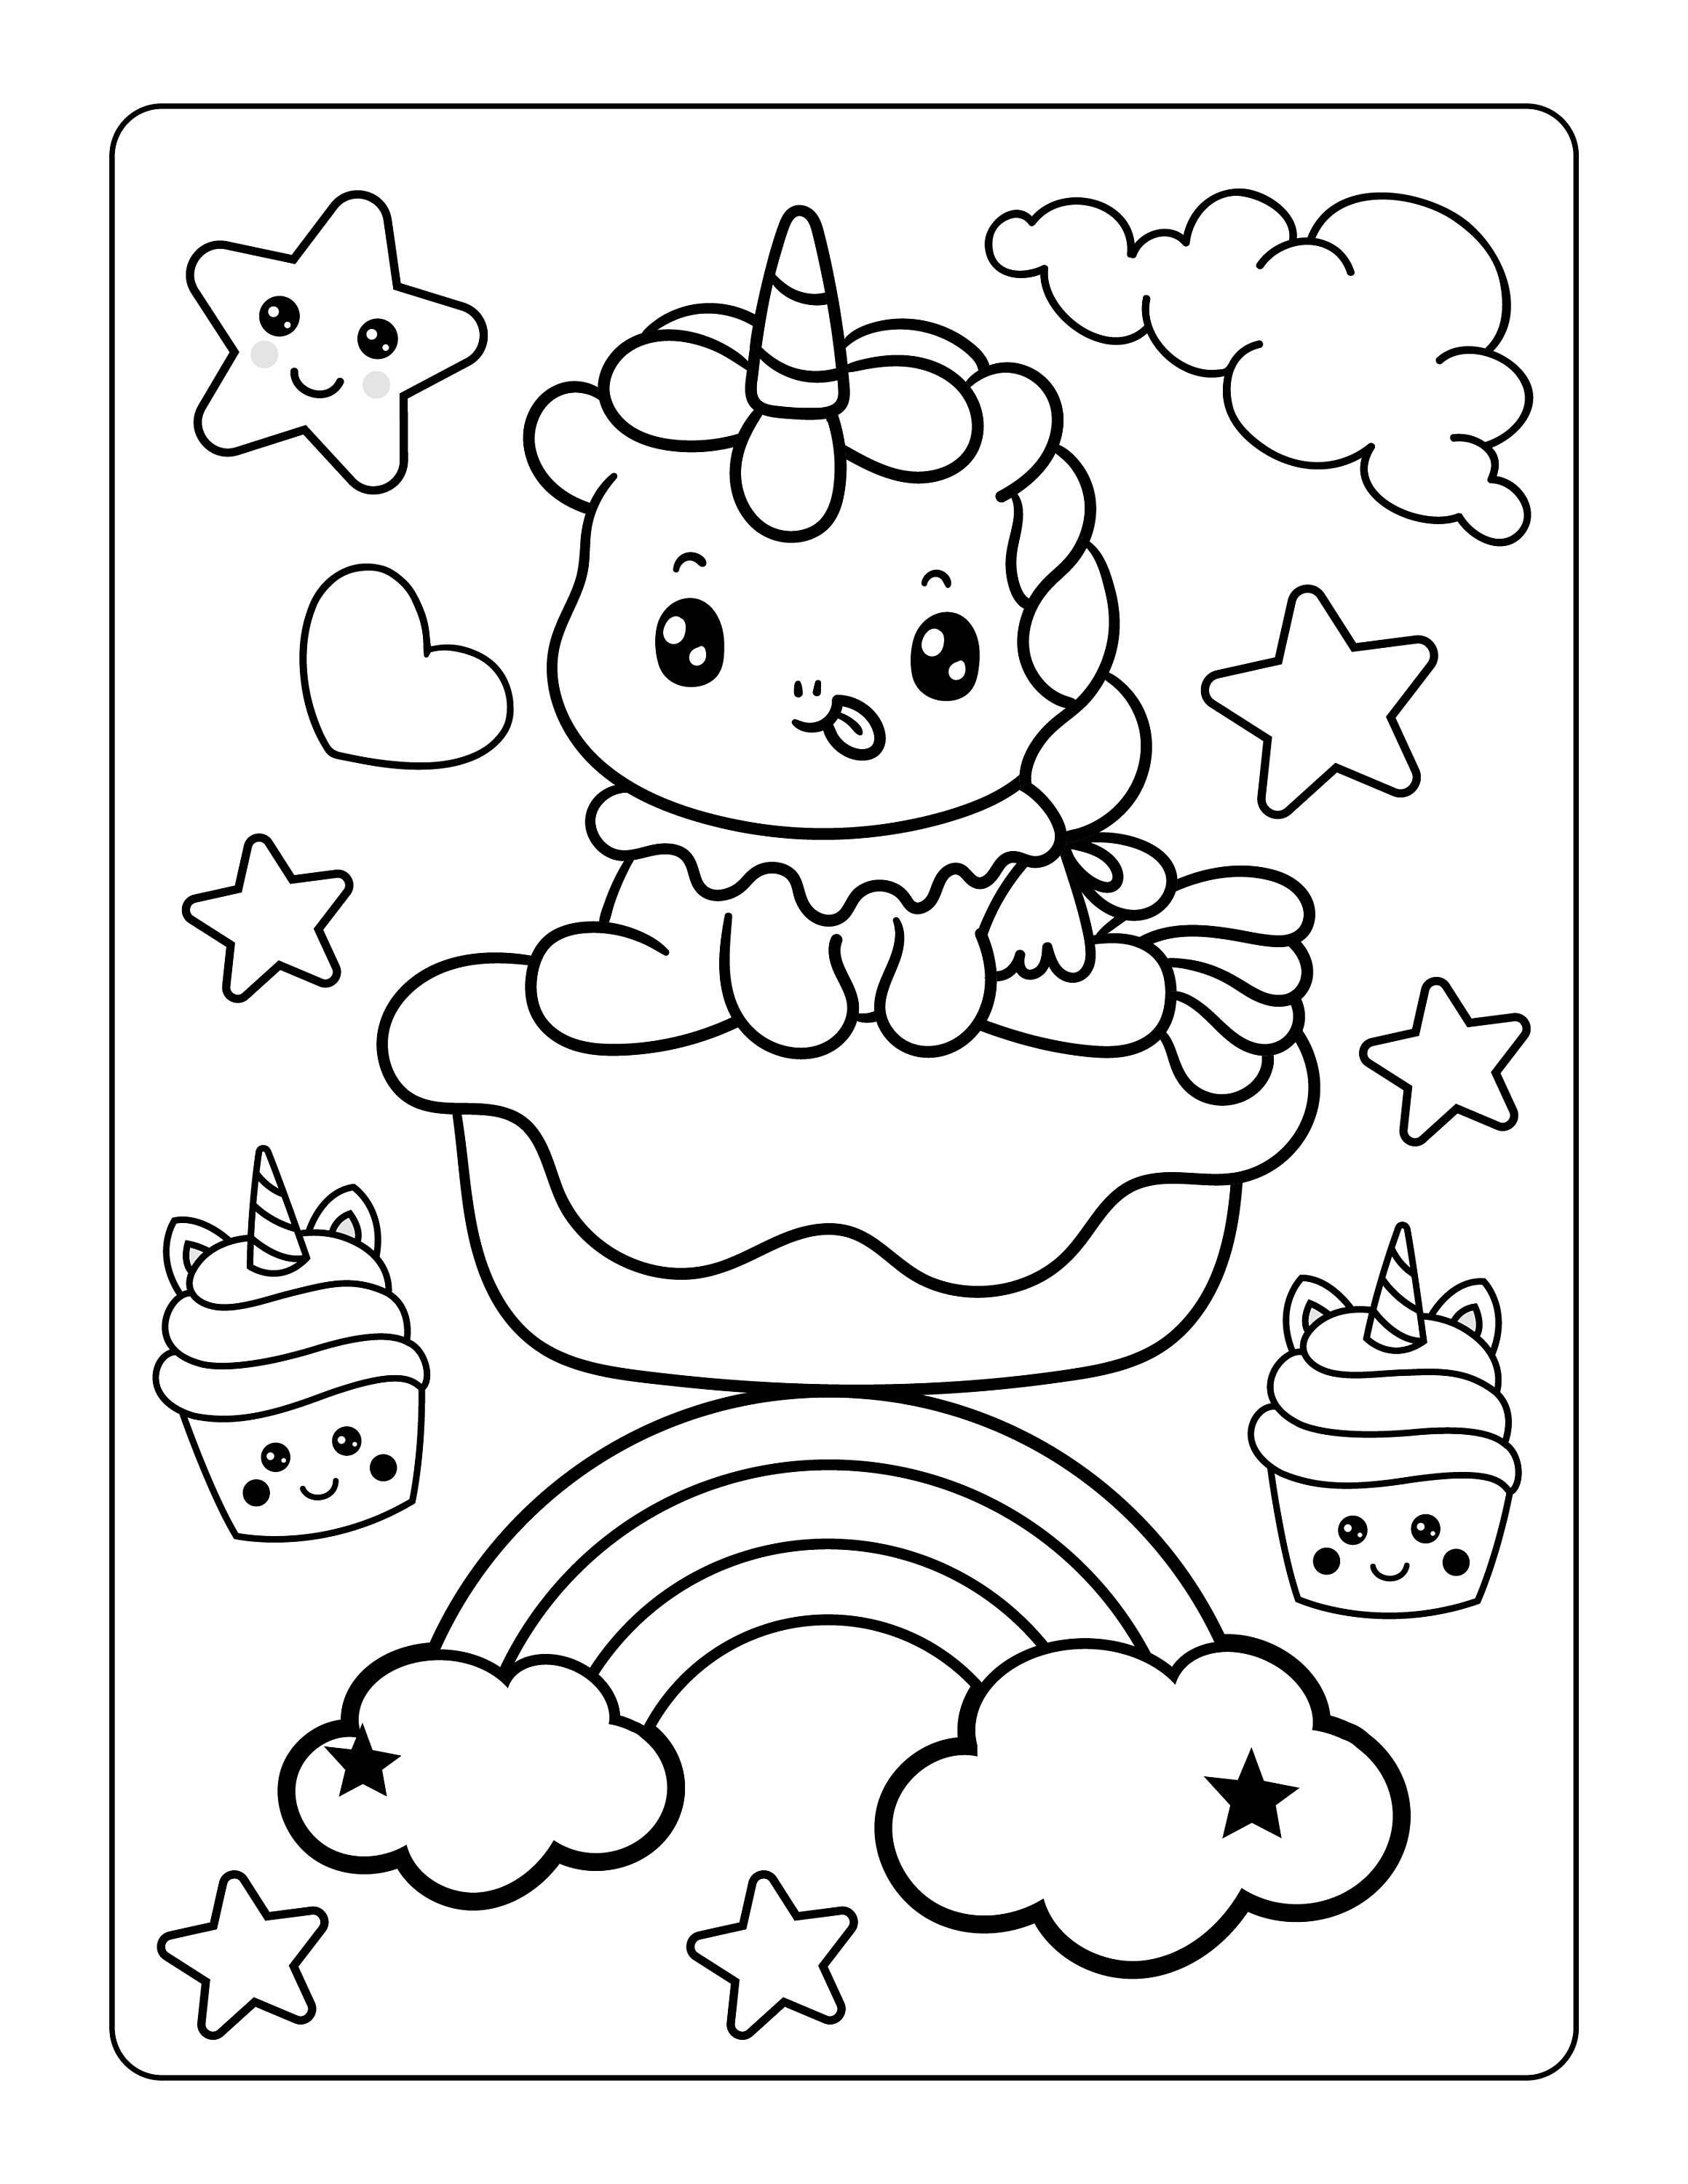 75 Pages Printable Unicorn Coloring Pages for Kids Unicorn | Etsy